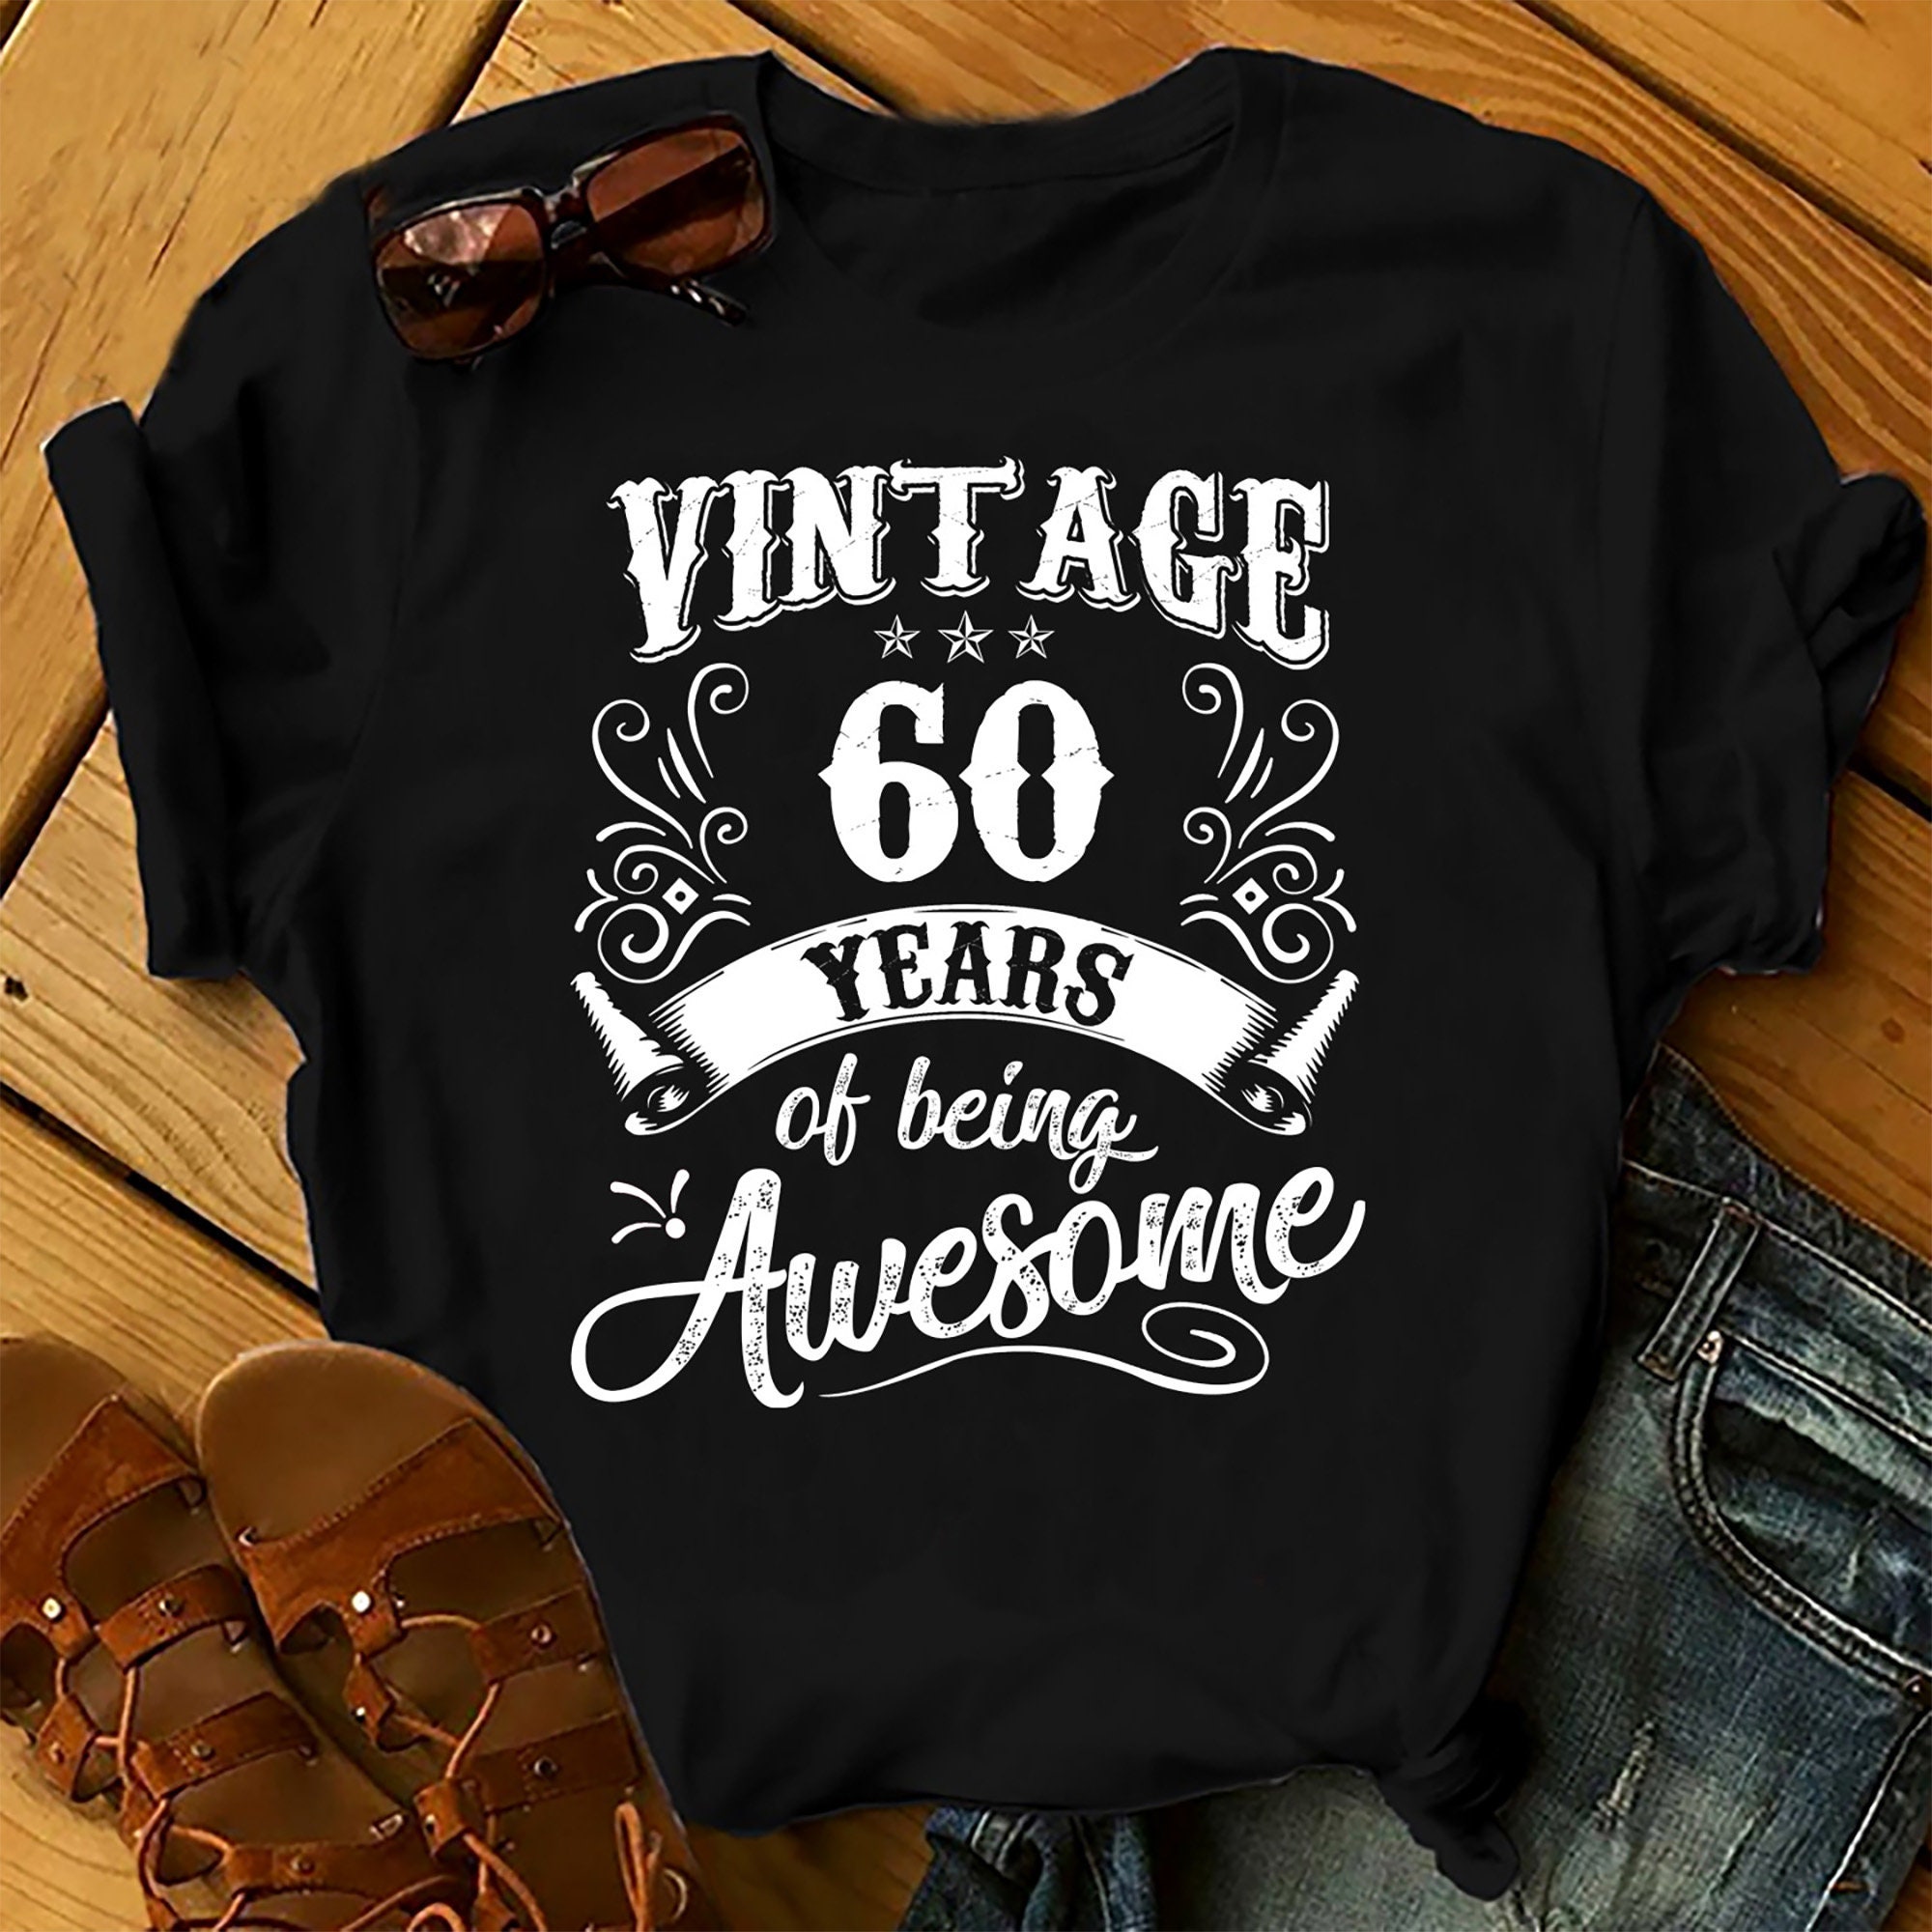 Vintage 60 Years Of Being Awesome – Shirts Women, Birthday T Shirts, Summer Tops, Beach T Shirts